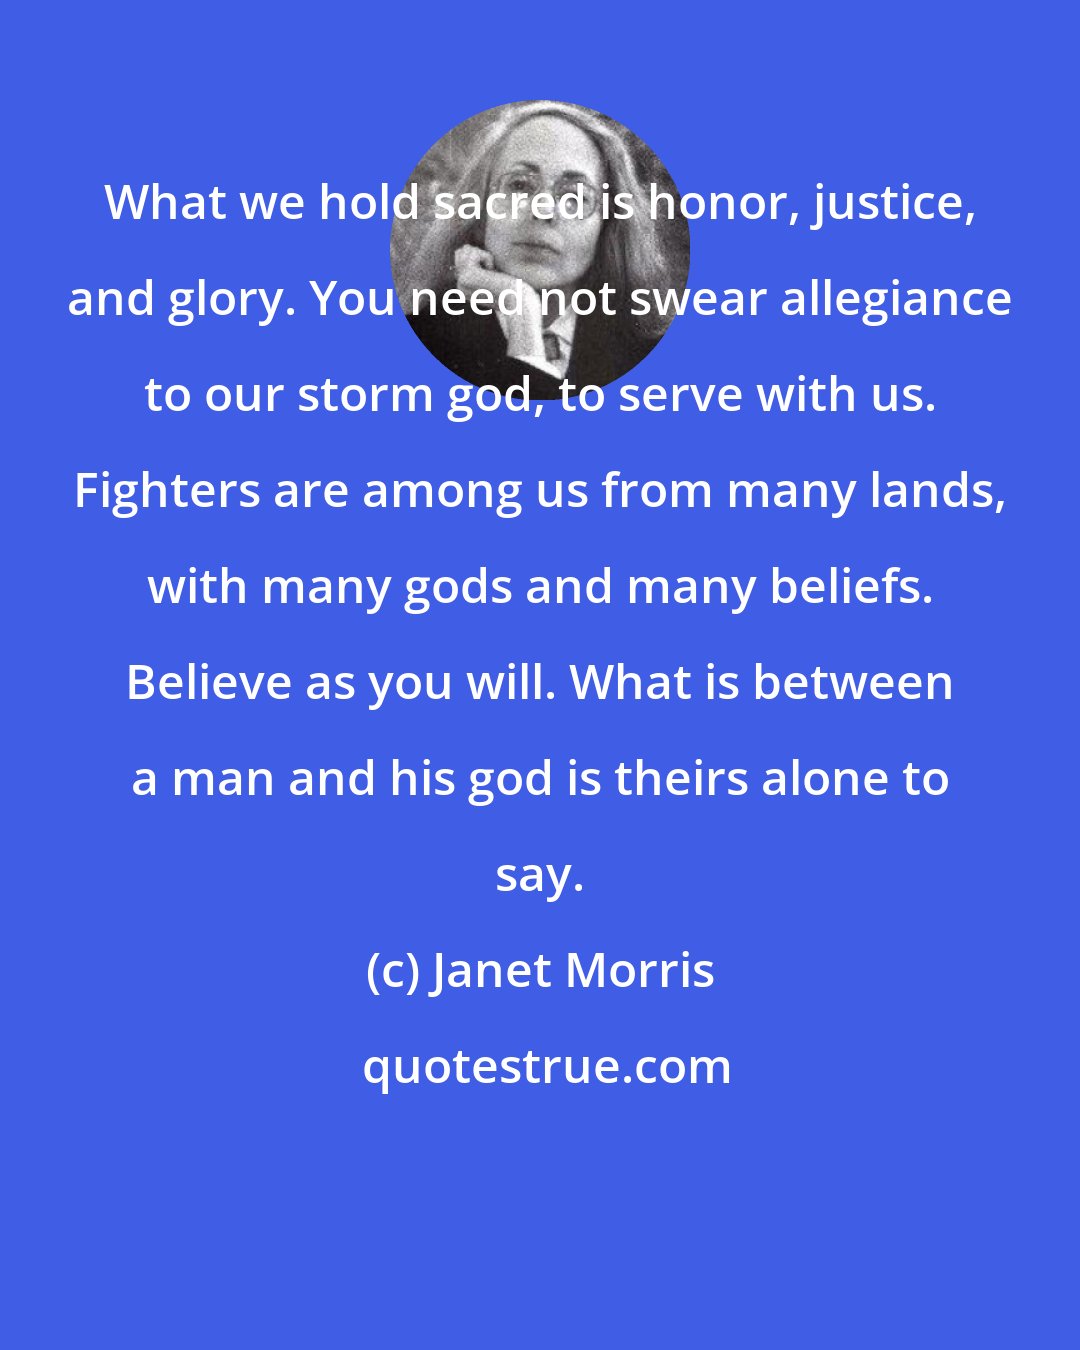 Janet Morris: What we hold sacred is honor, justice, and glory. You need not swear allegiance to our storm god, to serve with us. Fighters are among us from many lands, with many gods and many beliefs. Believe as you will. What is between a man and his god is theirs alone to say.